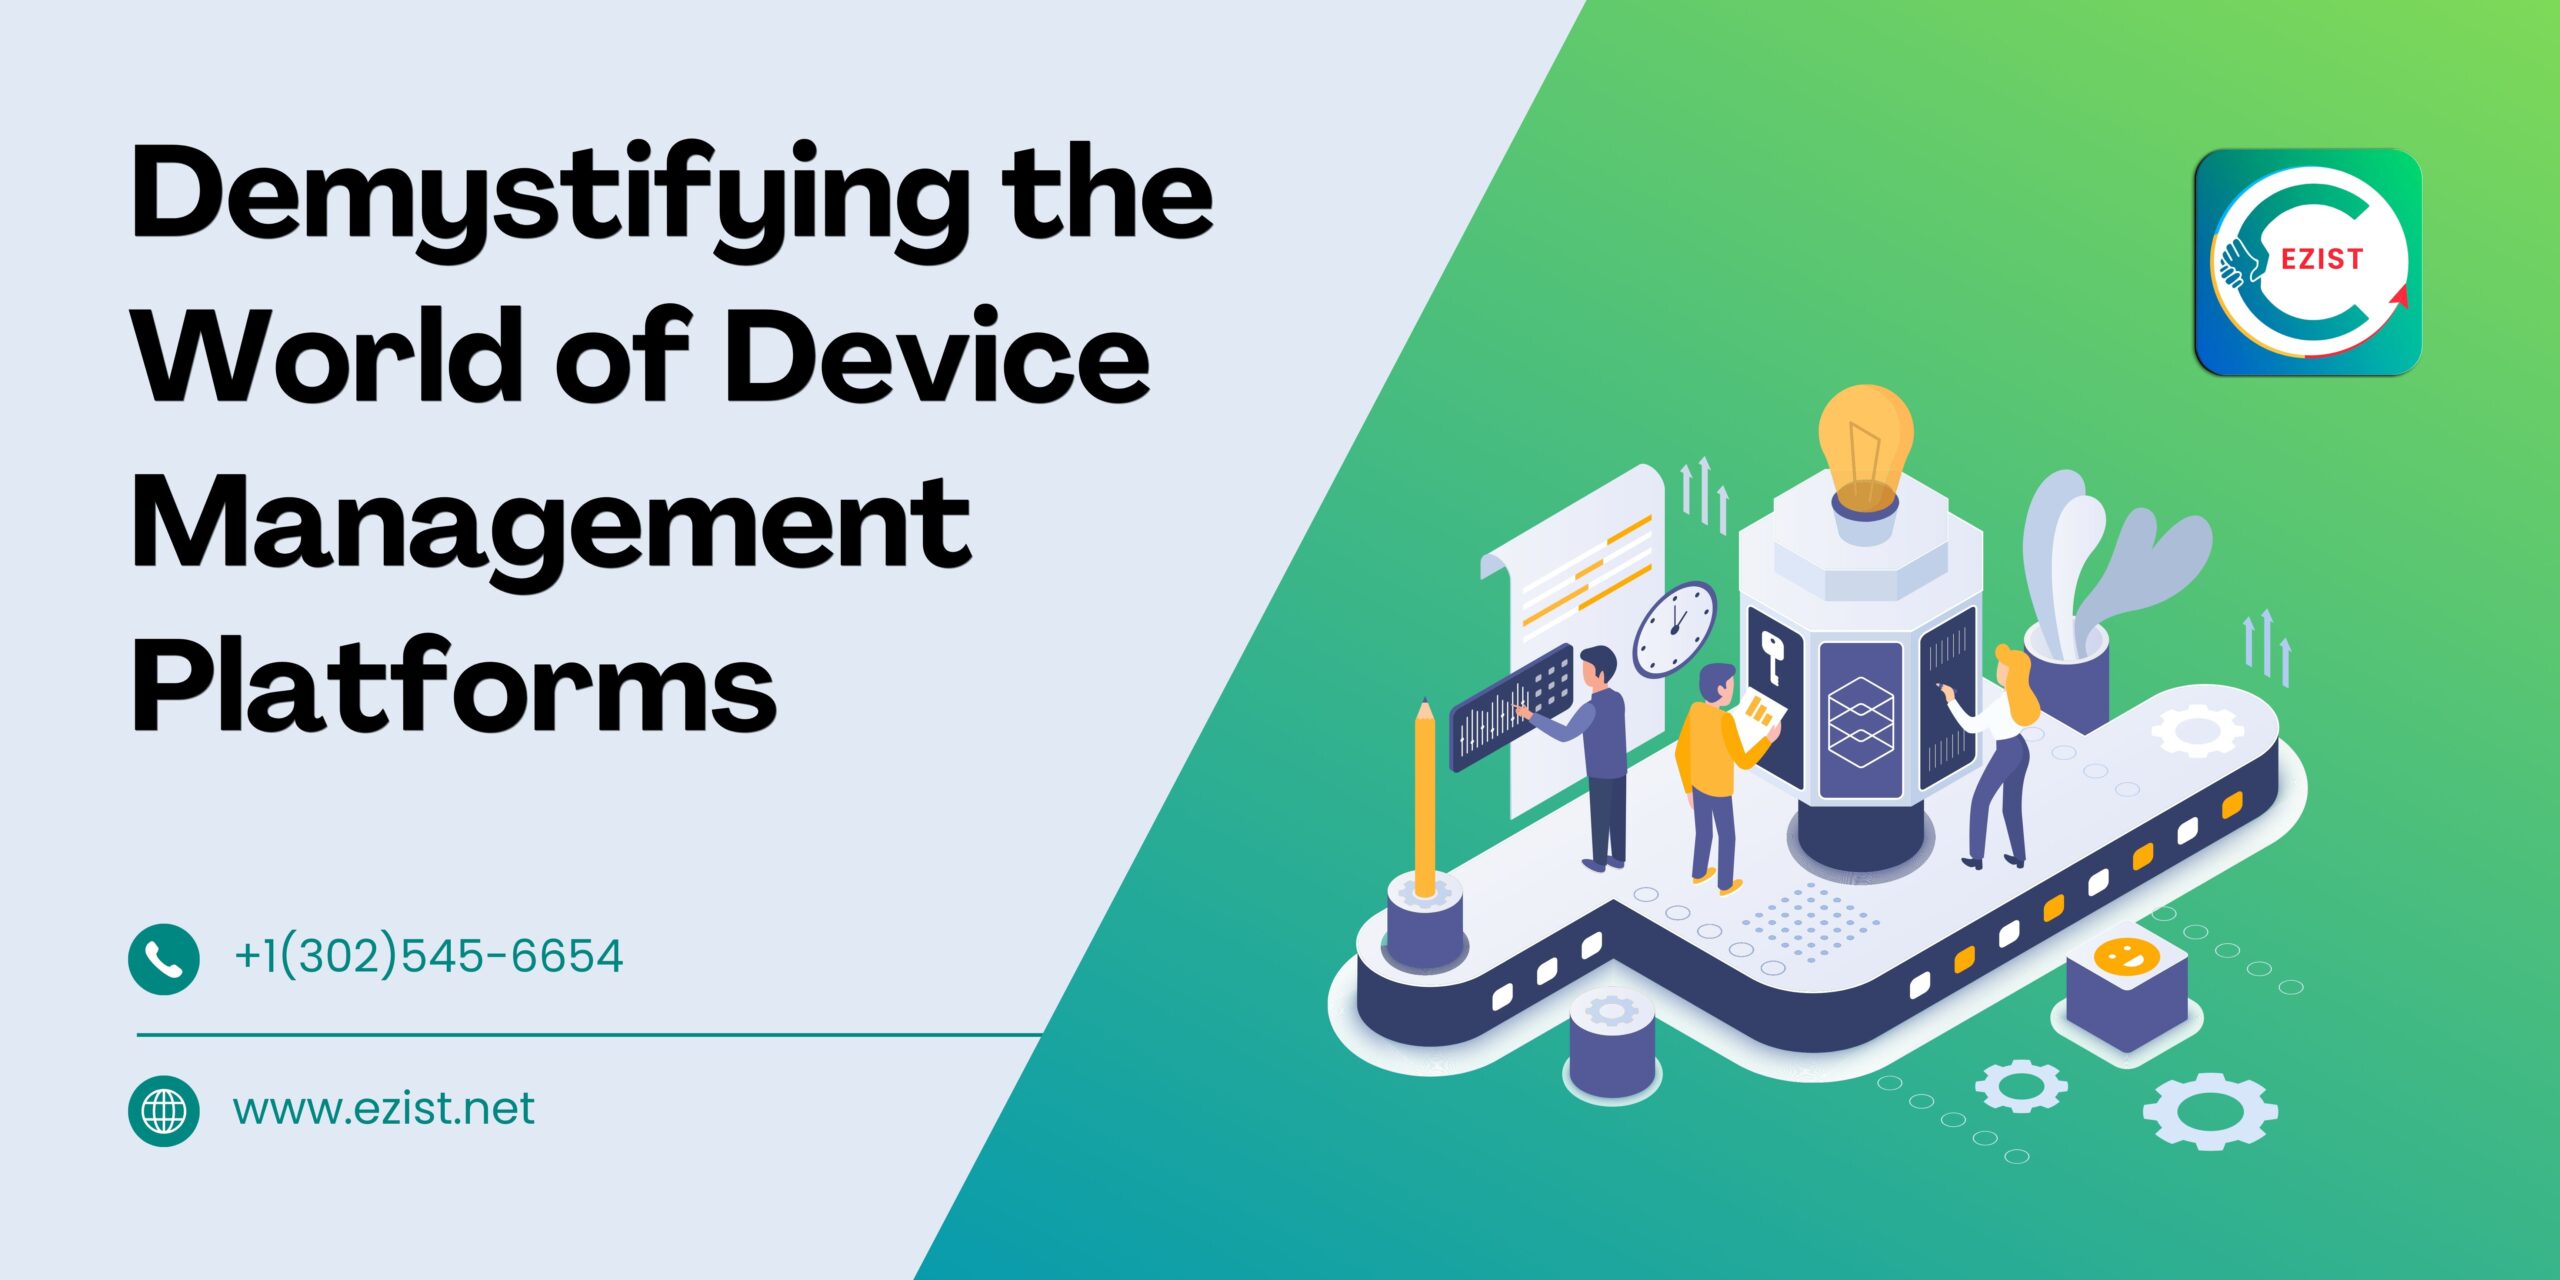 Demystifying the World of Device Management Platforms